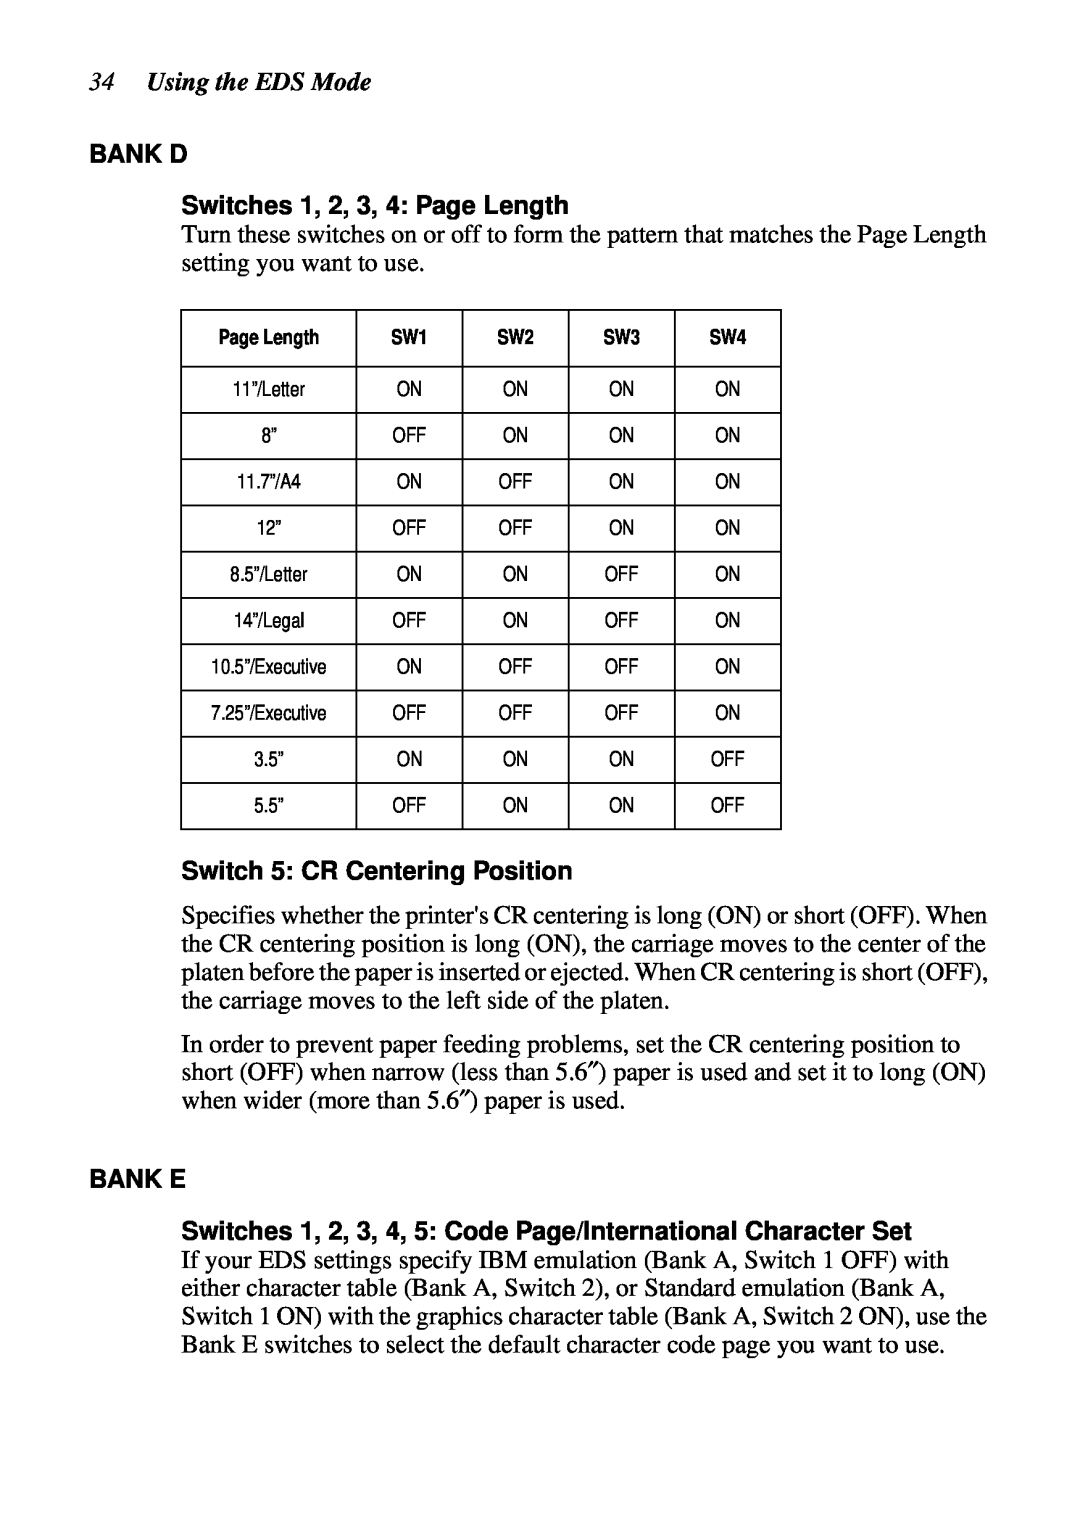 Star Micronics DOT MATRIX PRINTERS, LC-1521, LC-1511 user manual Using the EDS Mode, BANK D Switches 1, 2, 3, 4 Page Length 